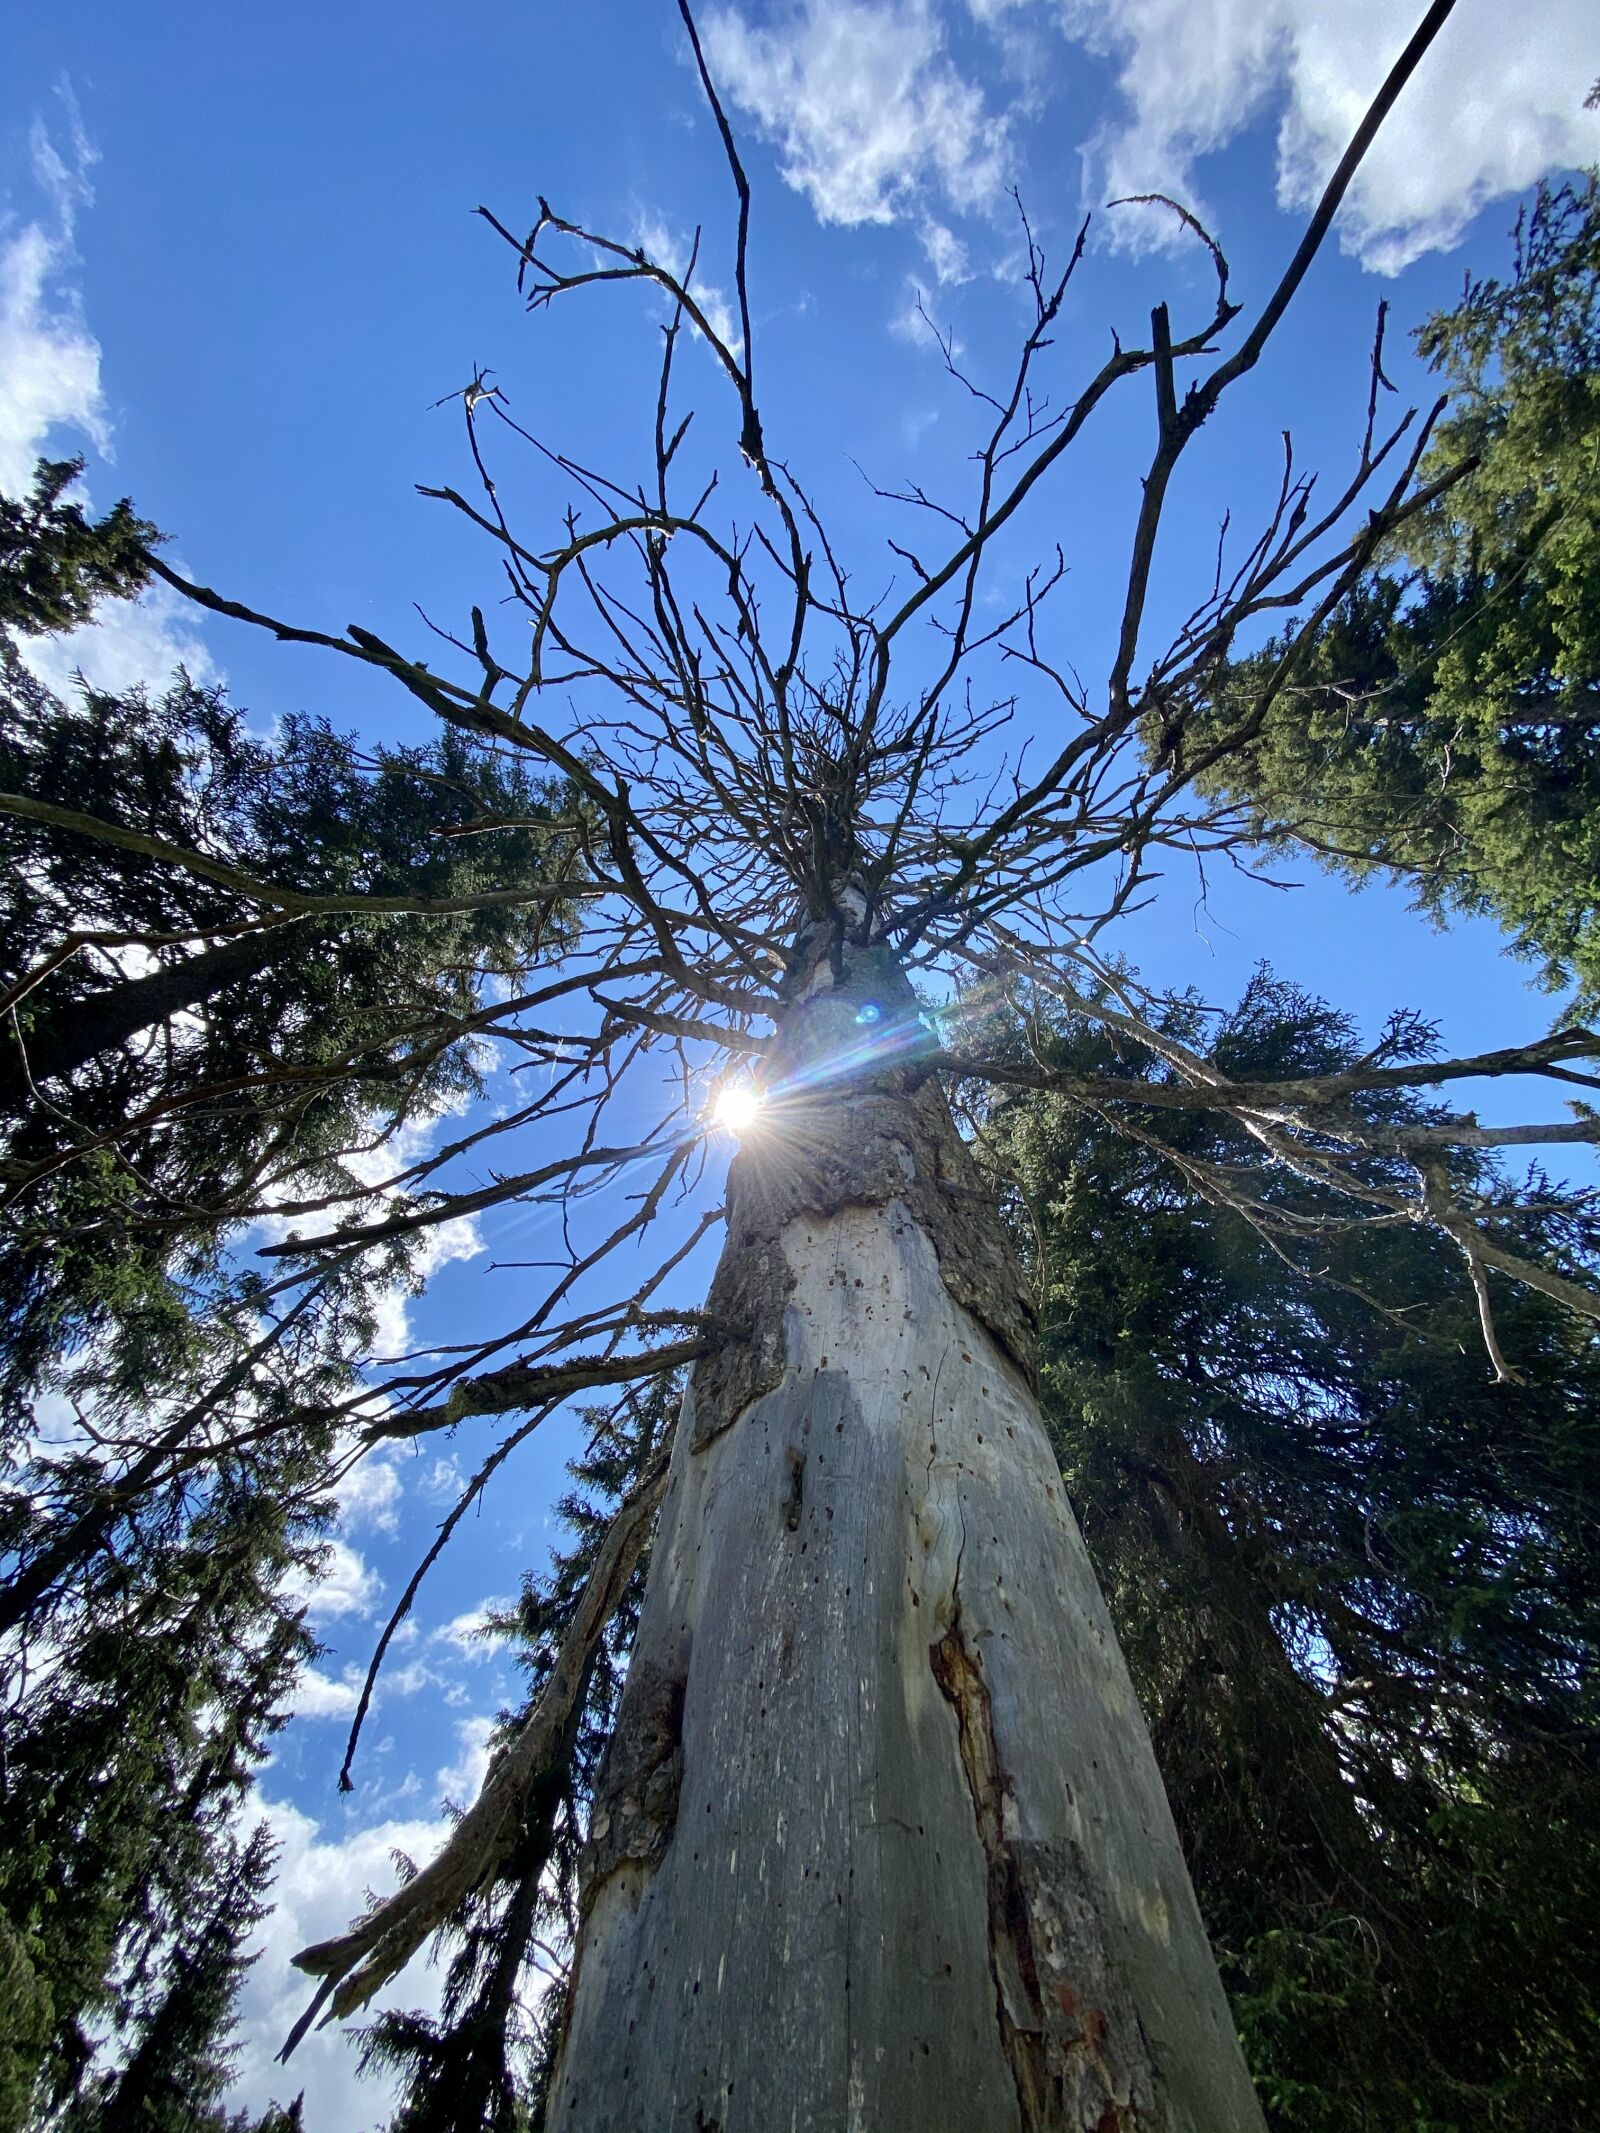 iPhone 11 Pro back triple camera 1.54mm f/2.4 sample photo. Tree, forest, nature photography